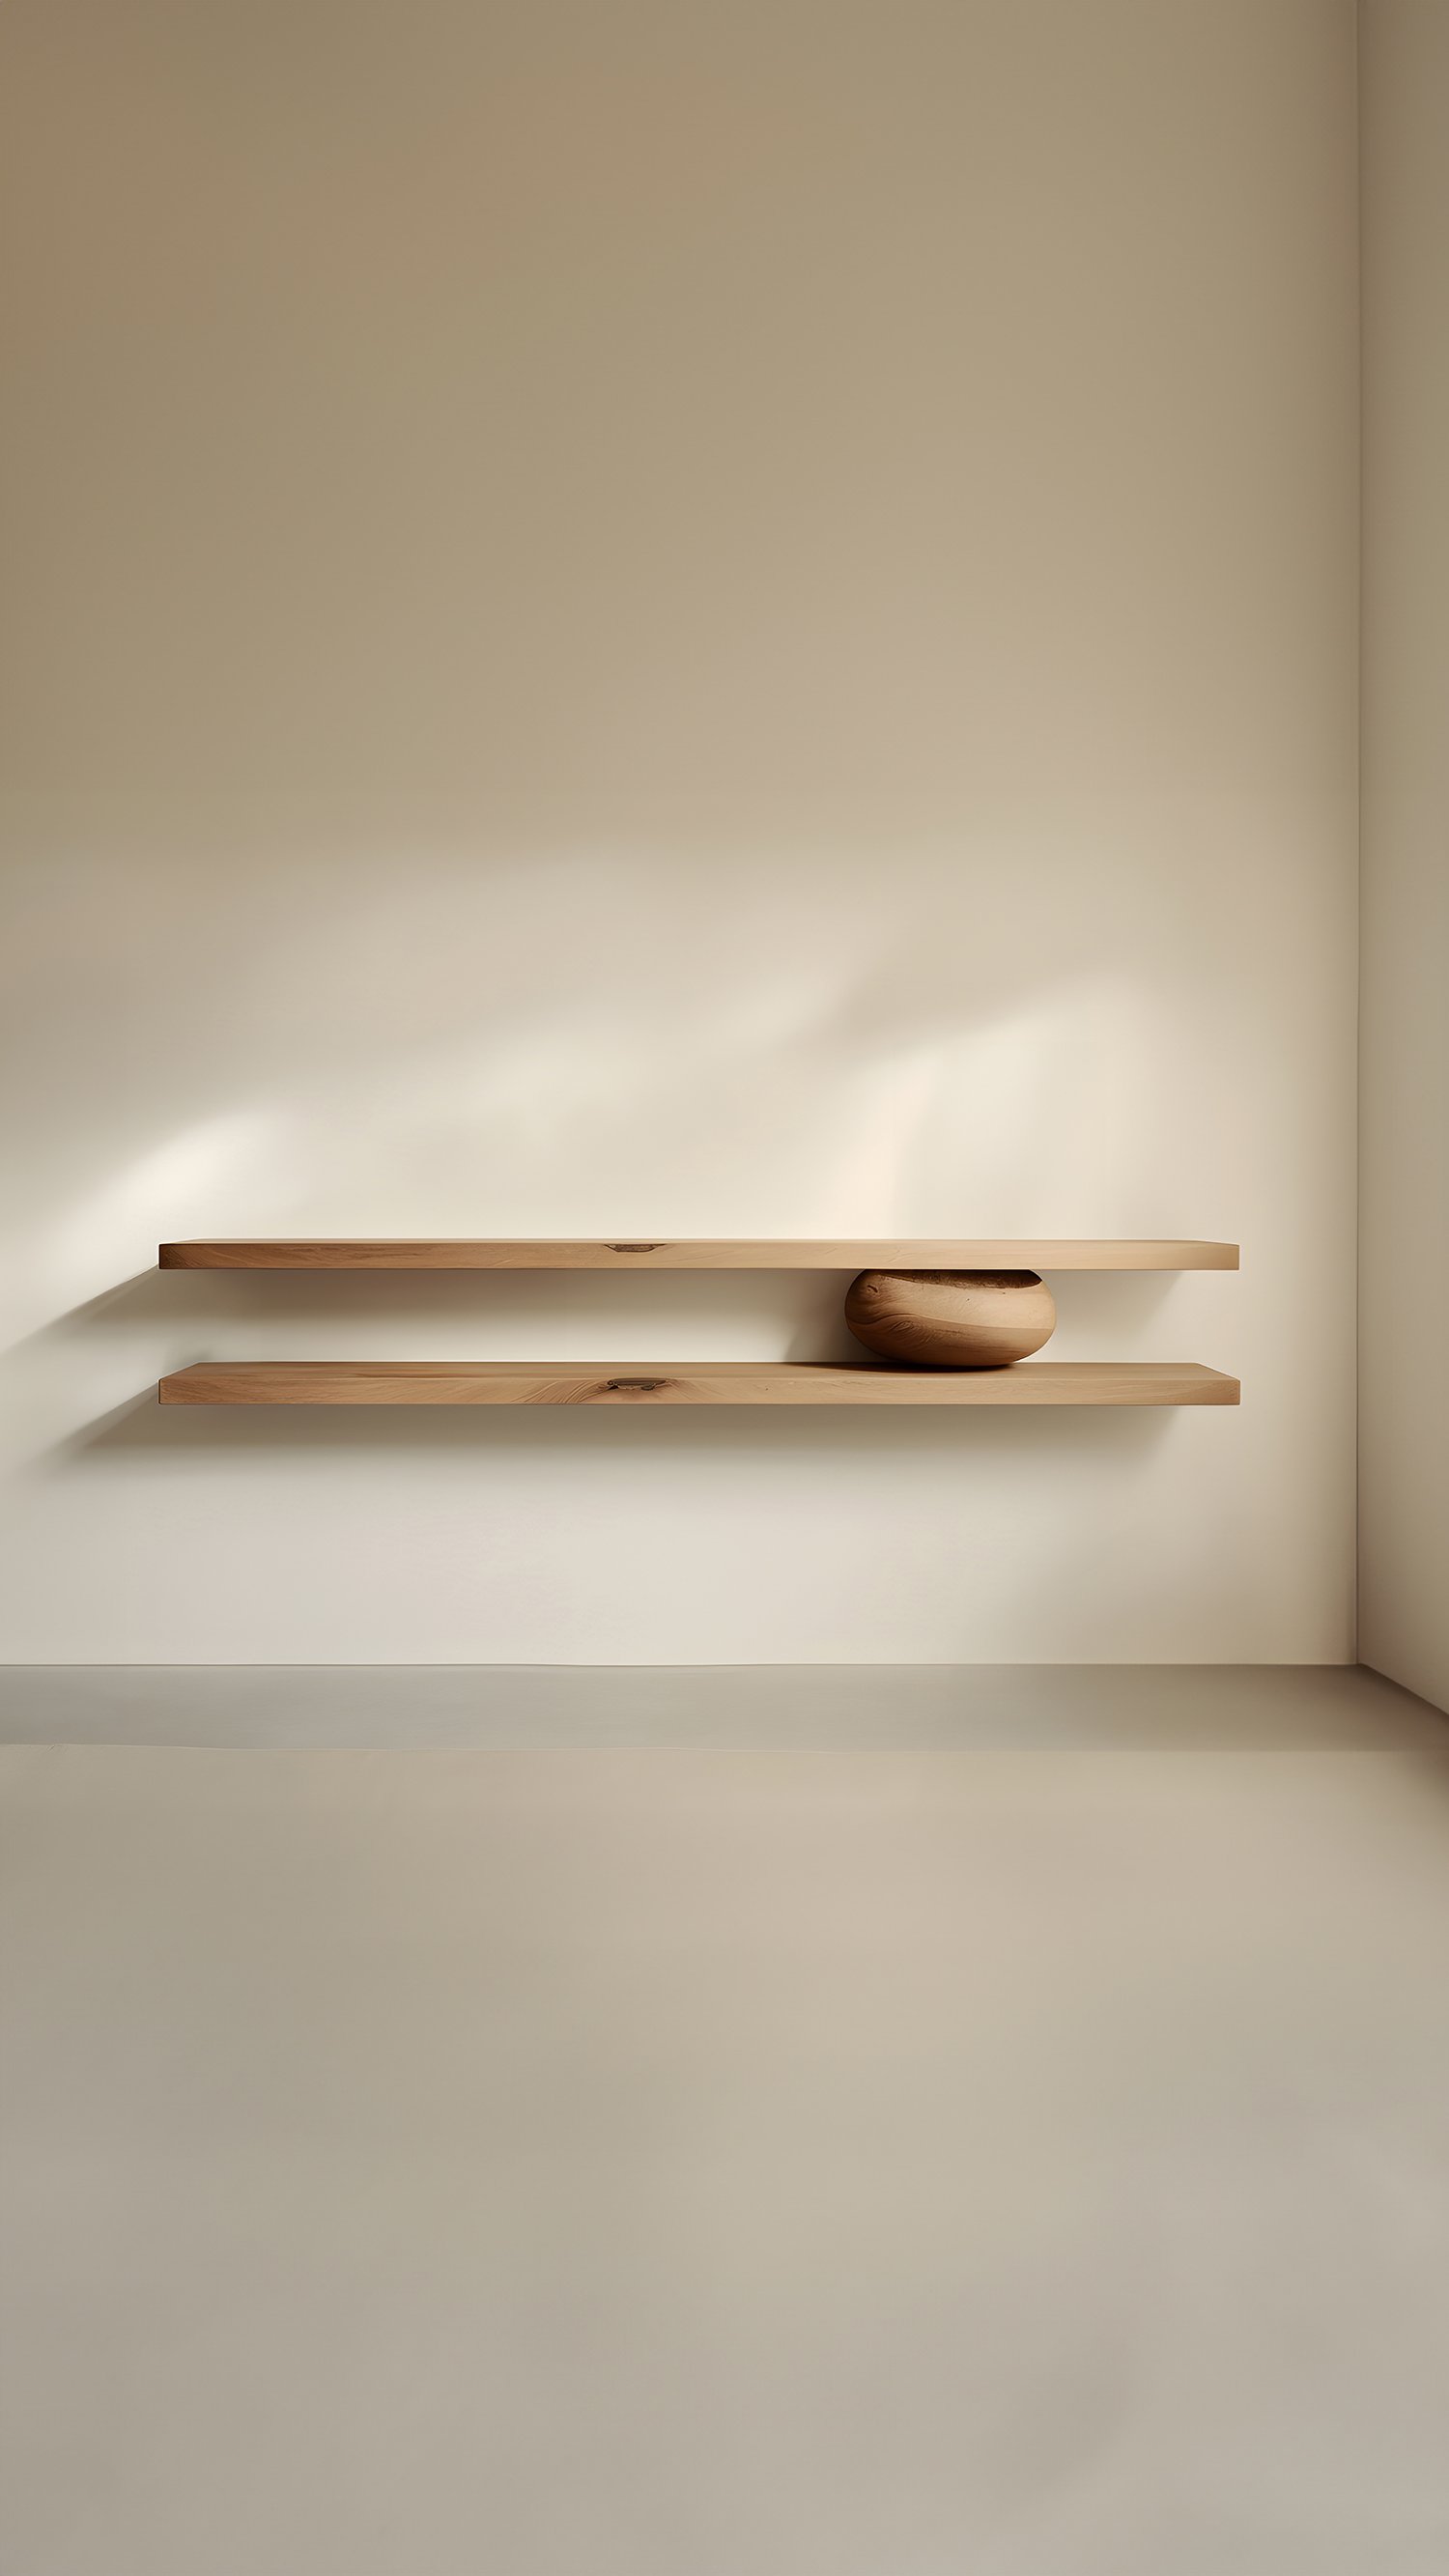 Set of Two Floating Shelves with One Sculptural Wooden Pebble Accent in the Middle, Sereno by Joel Escalona — 8.jpg